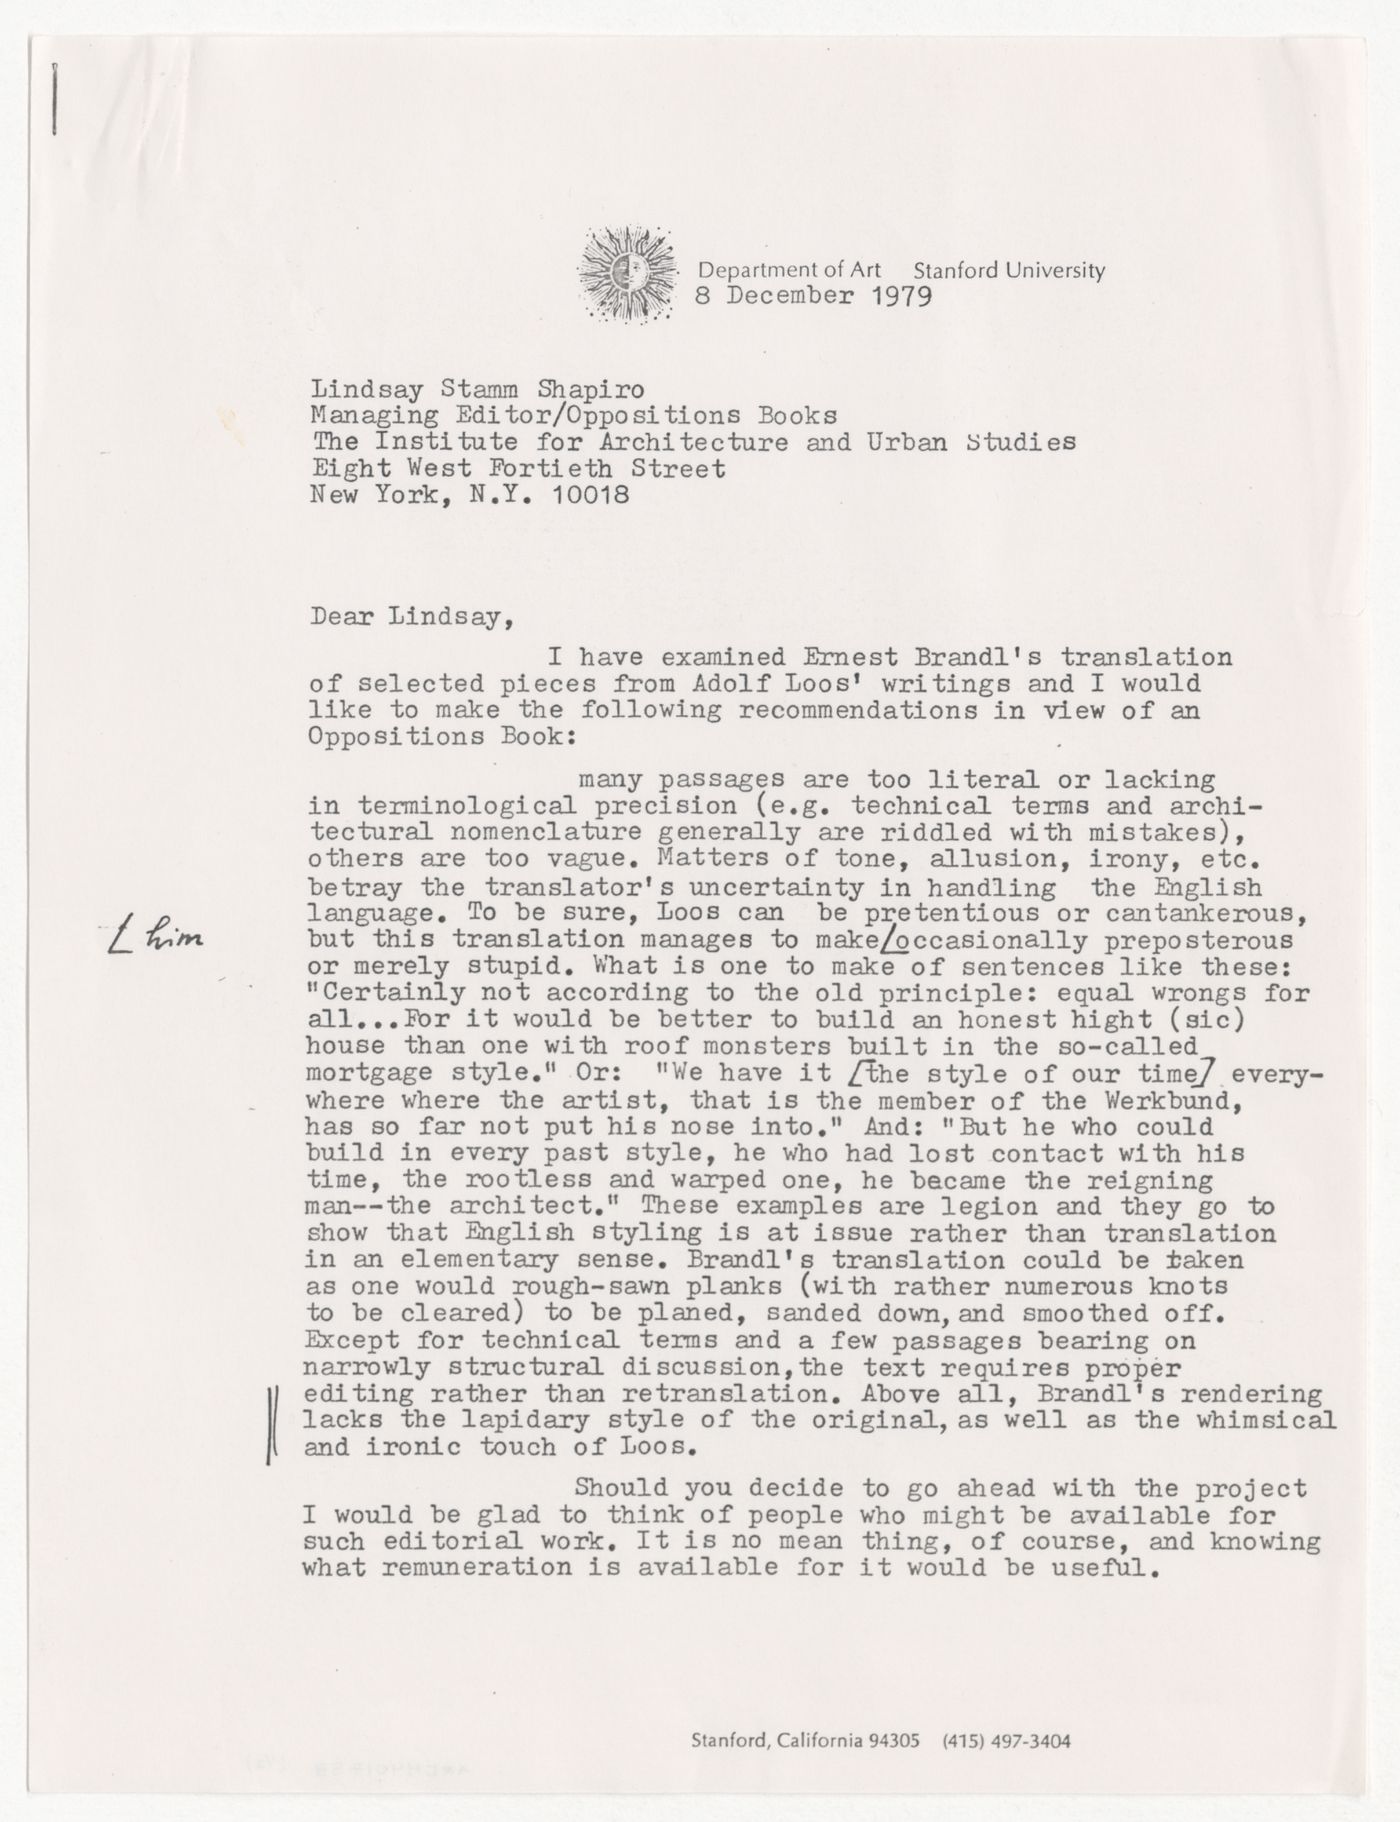 Letter from Kurt W. Forster to Lindsay Stamm Shapiro about publishing Adolf Loos's writings with Oppositions Books